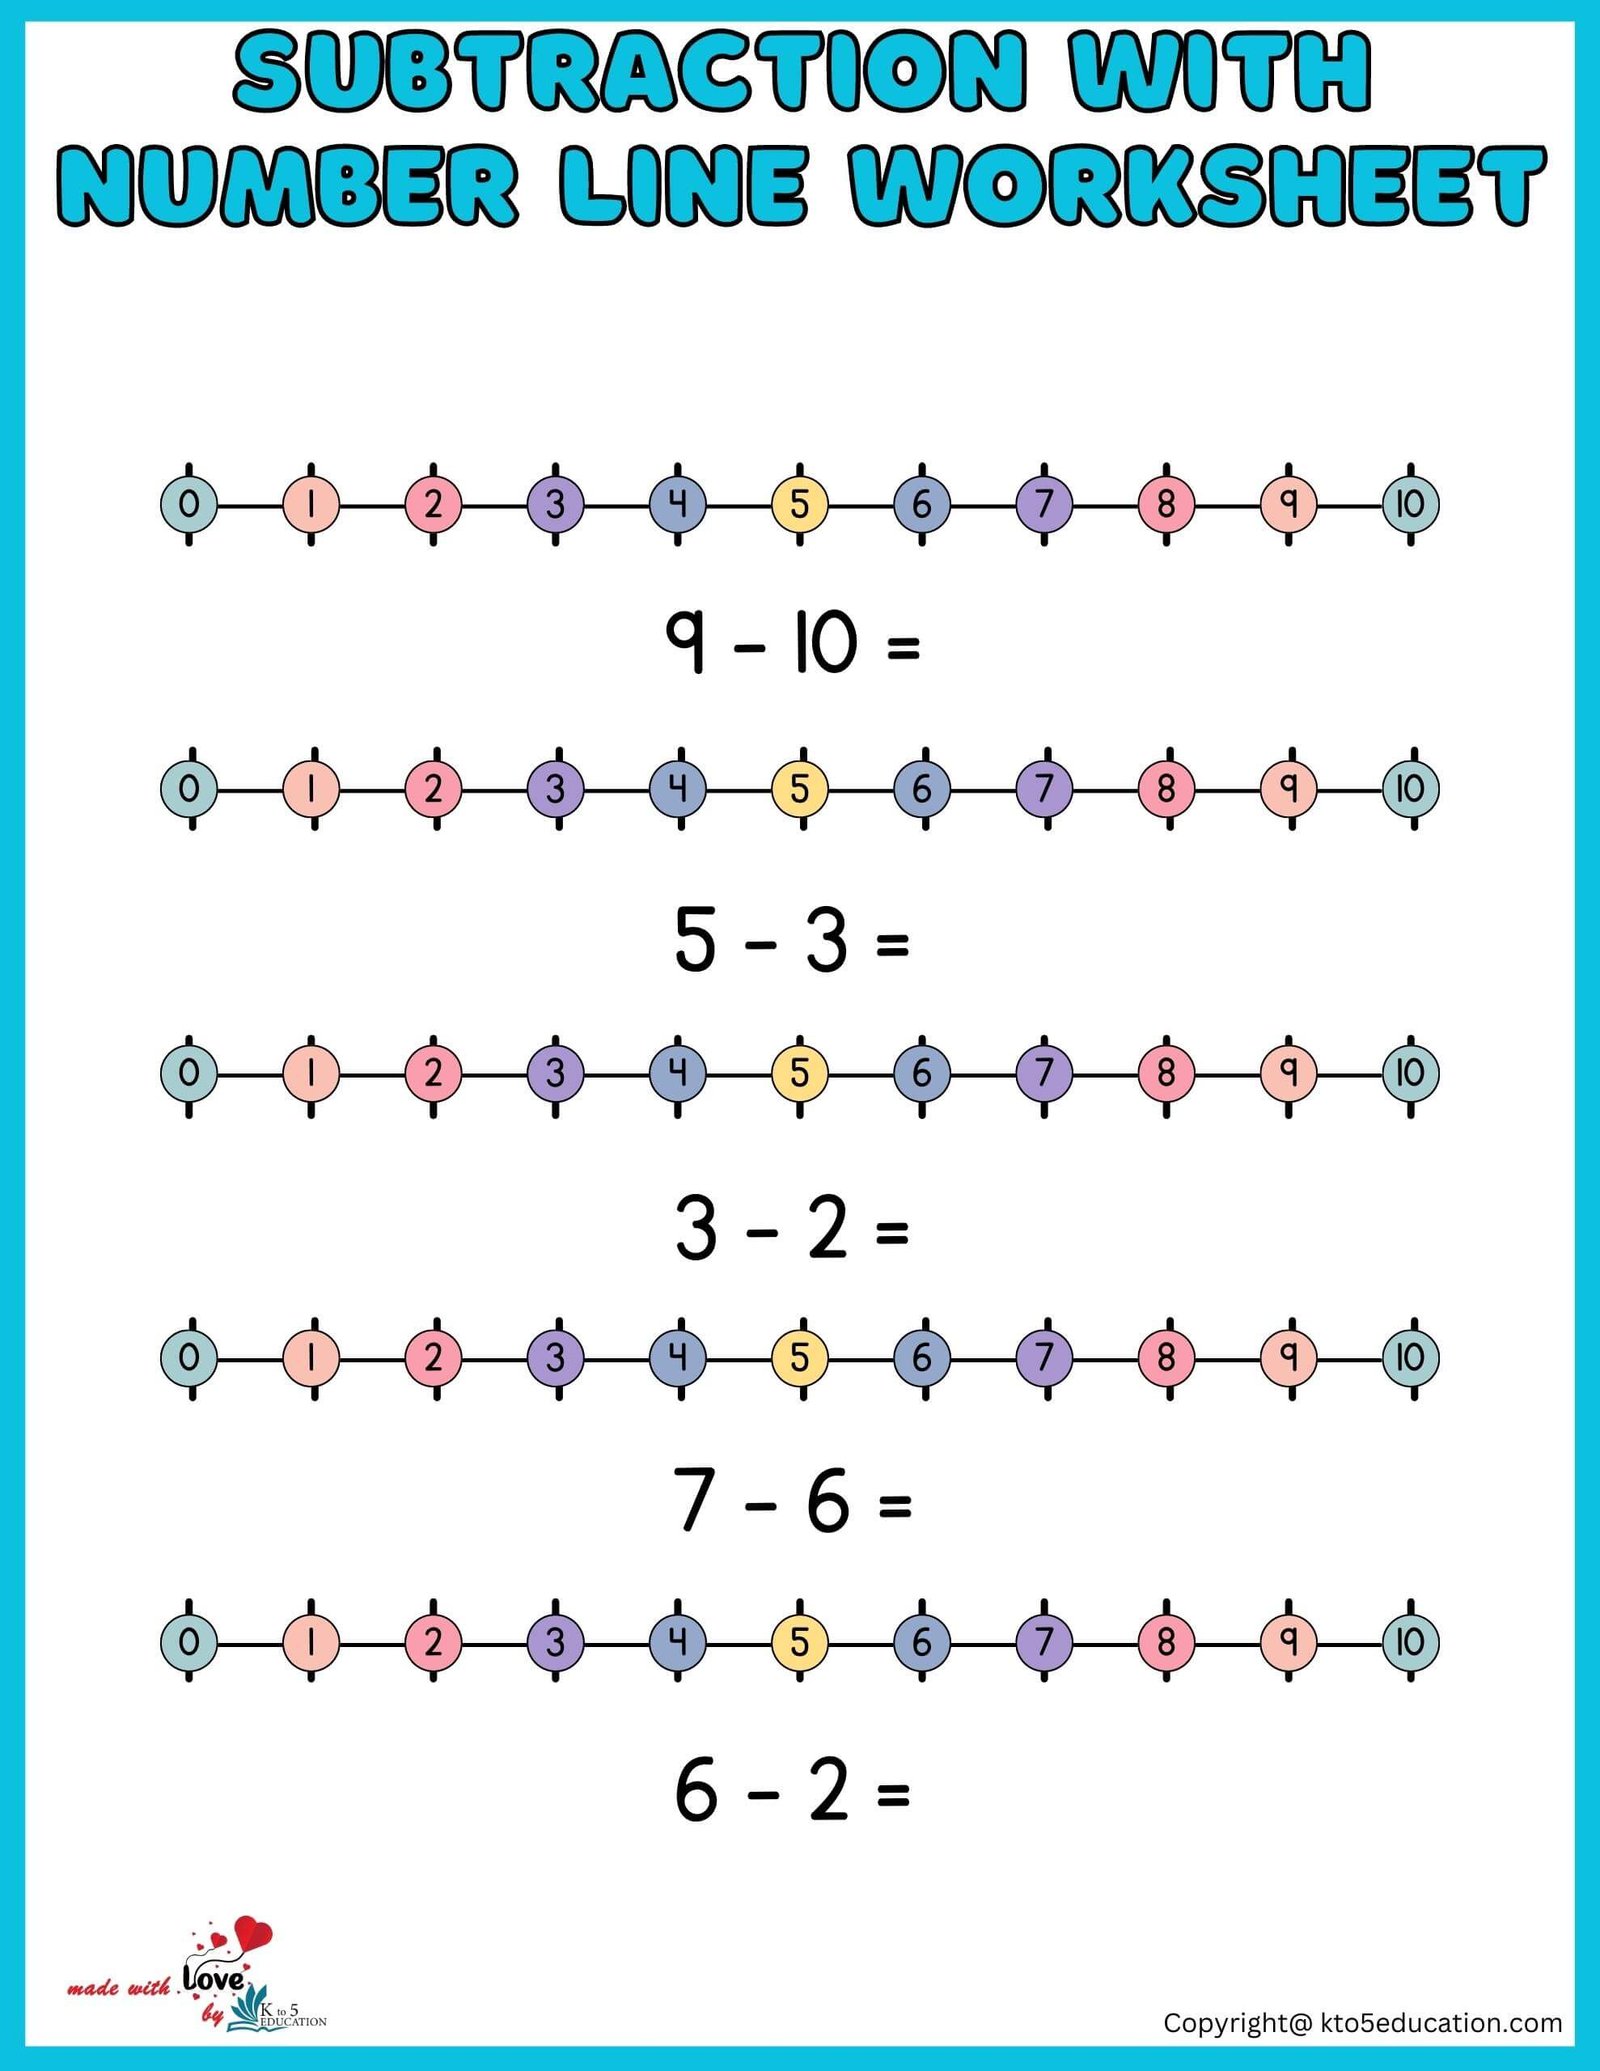 addition-and-subtraction-with-a-number-line-0-10-1-subtraction-in-year-1-age-5-6-by